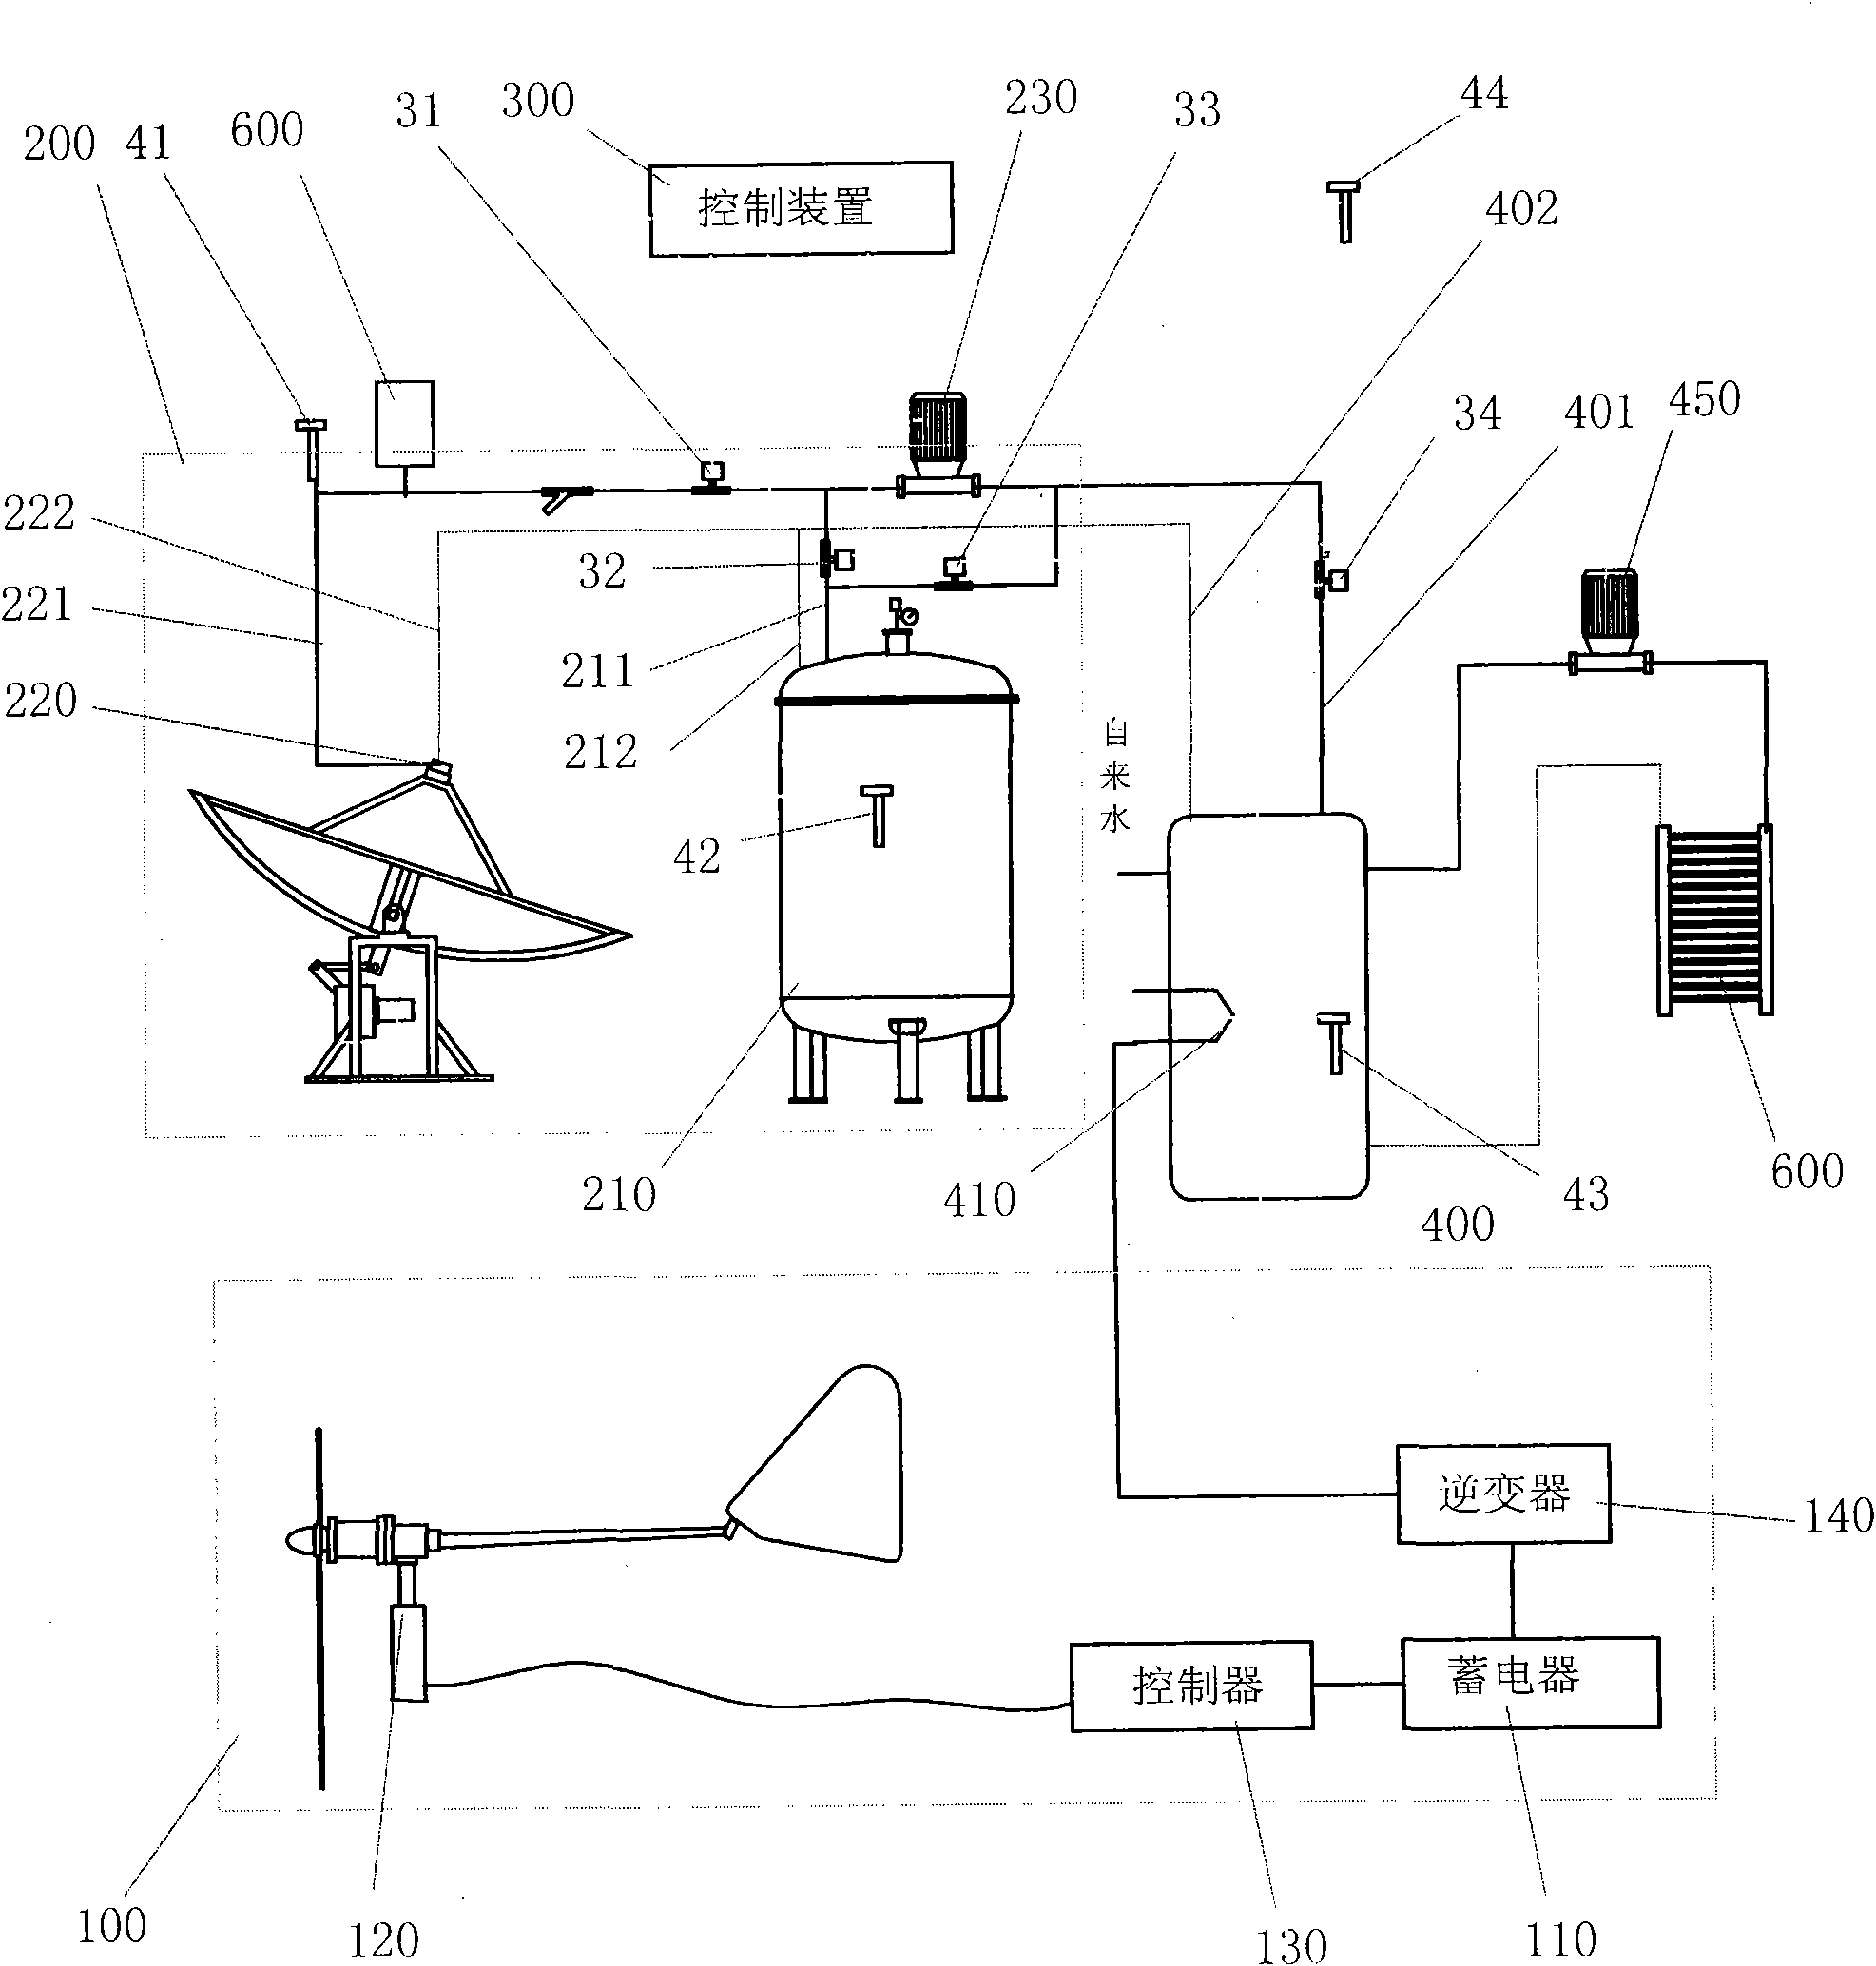 Wind-light complementation heat collecting system with energy storage device